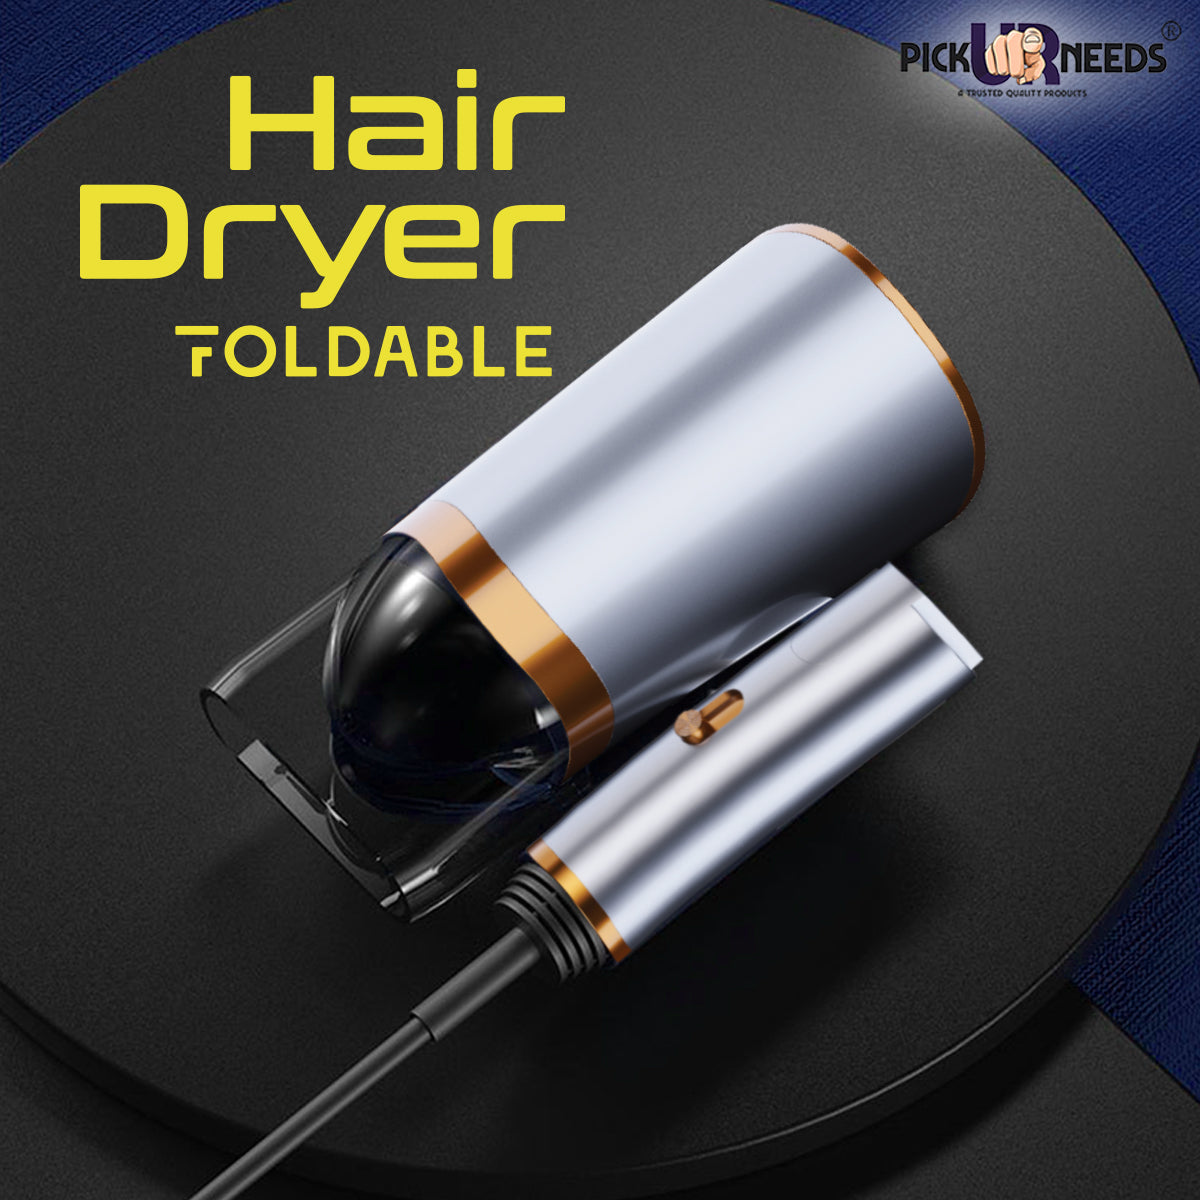 Pick Ur Needs Professional Foldable Stylish Hot And Cold Hair Dryer With Over Heat Protection For Men & Women